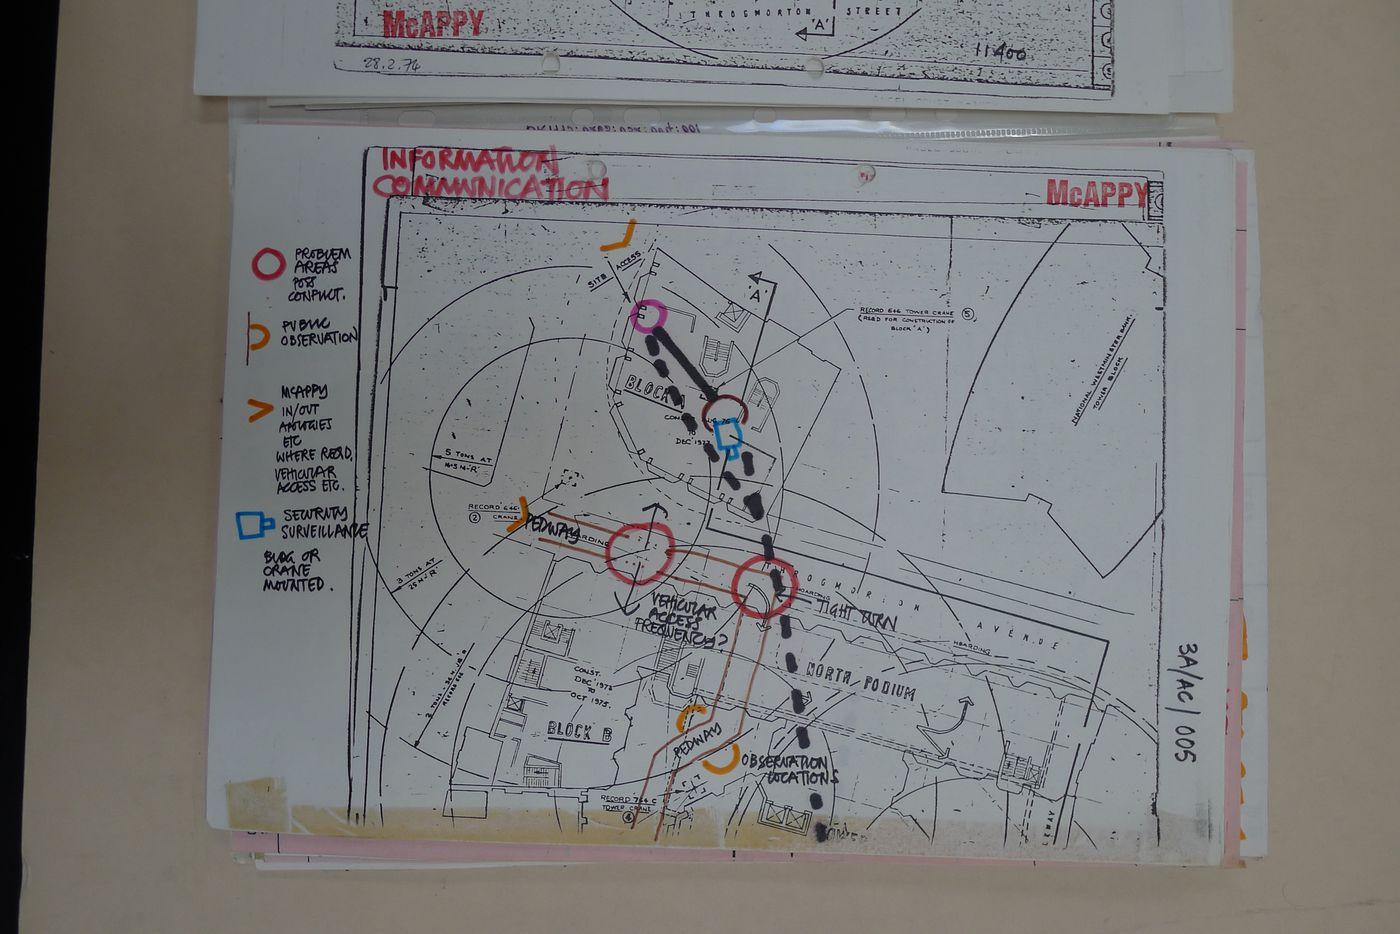 McAppy: site plan showing information communication